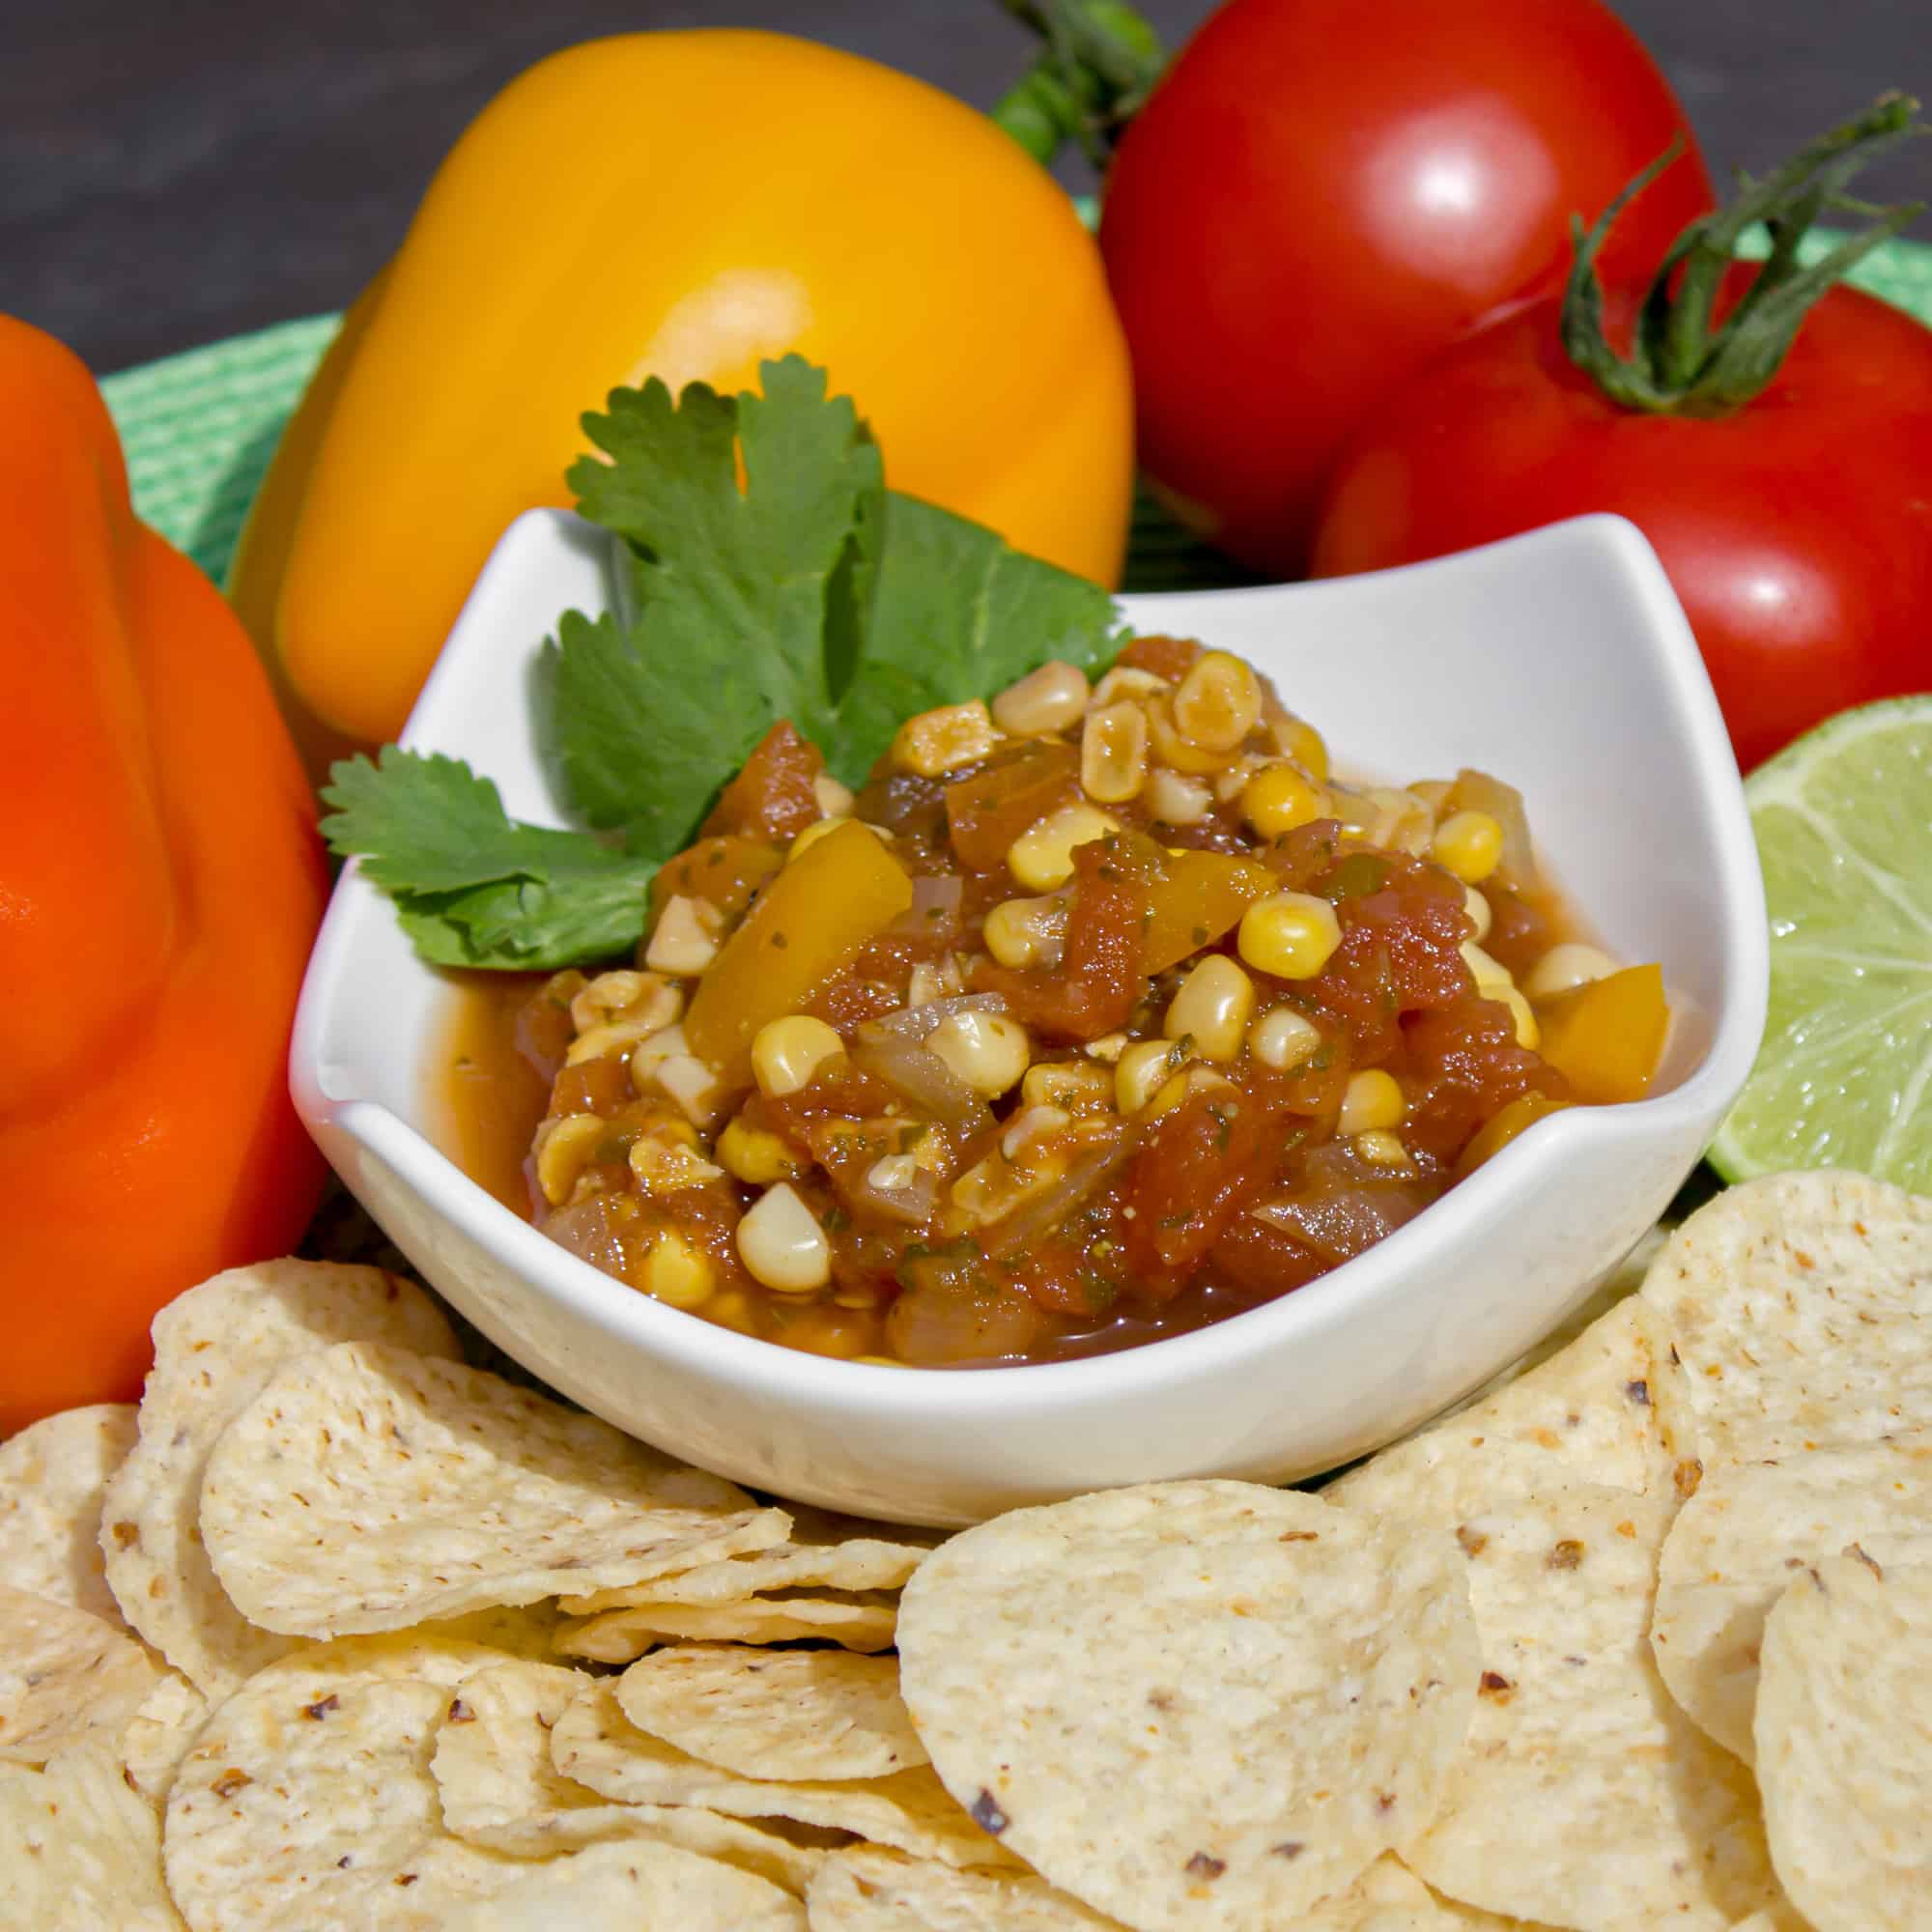 A fresh salsa with tomatoes, corn, onions, sweet peppers, jalapeno peppers, cumin and cilantro. A great Mexican appetizer to go with nacho tortilla chips.